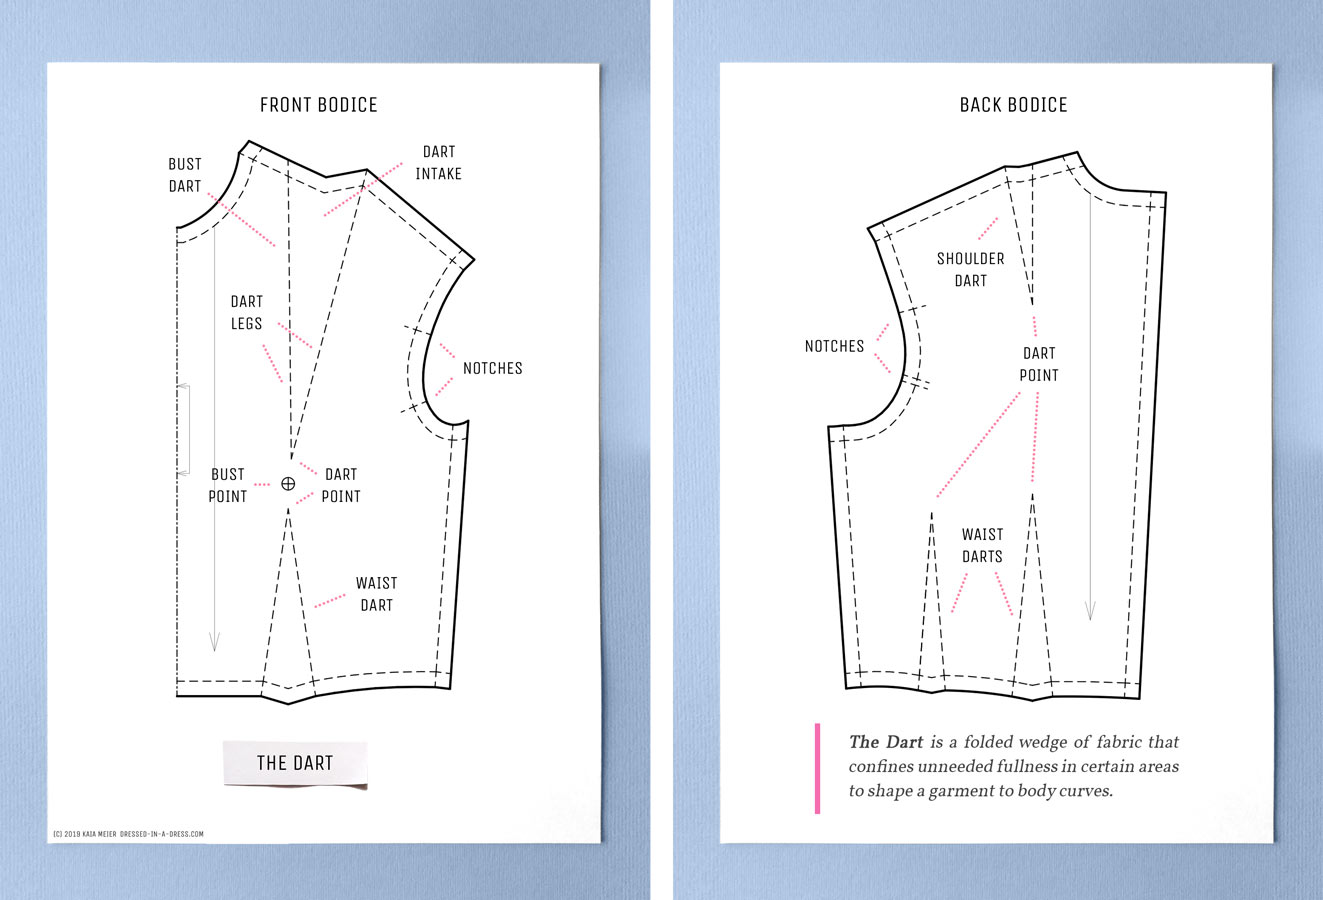 Back to Pattern Making Basics - The Shapes of Fabric